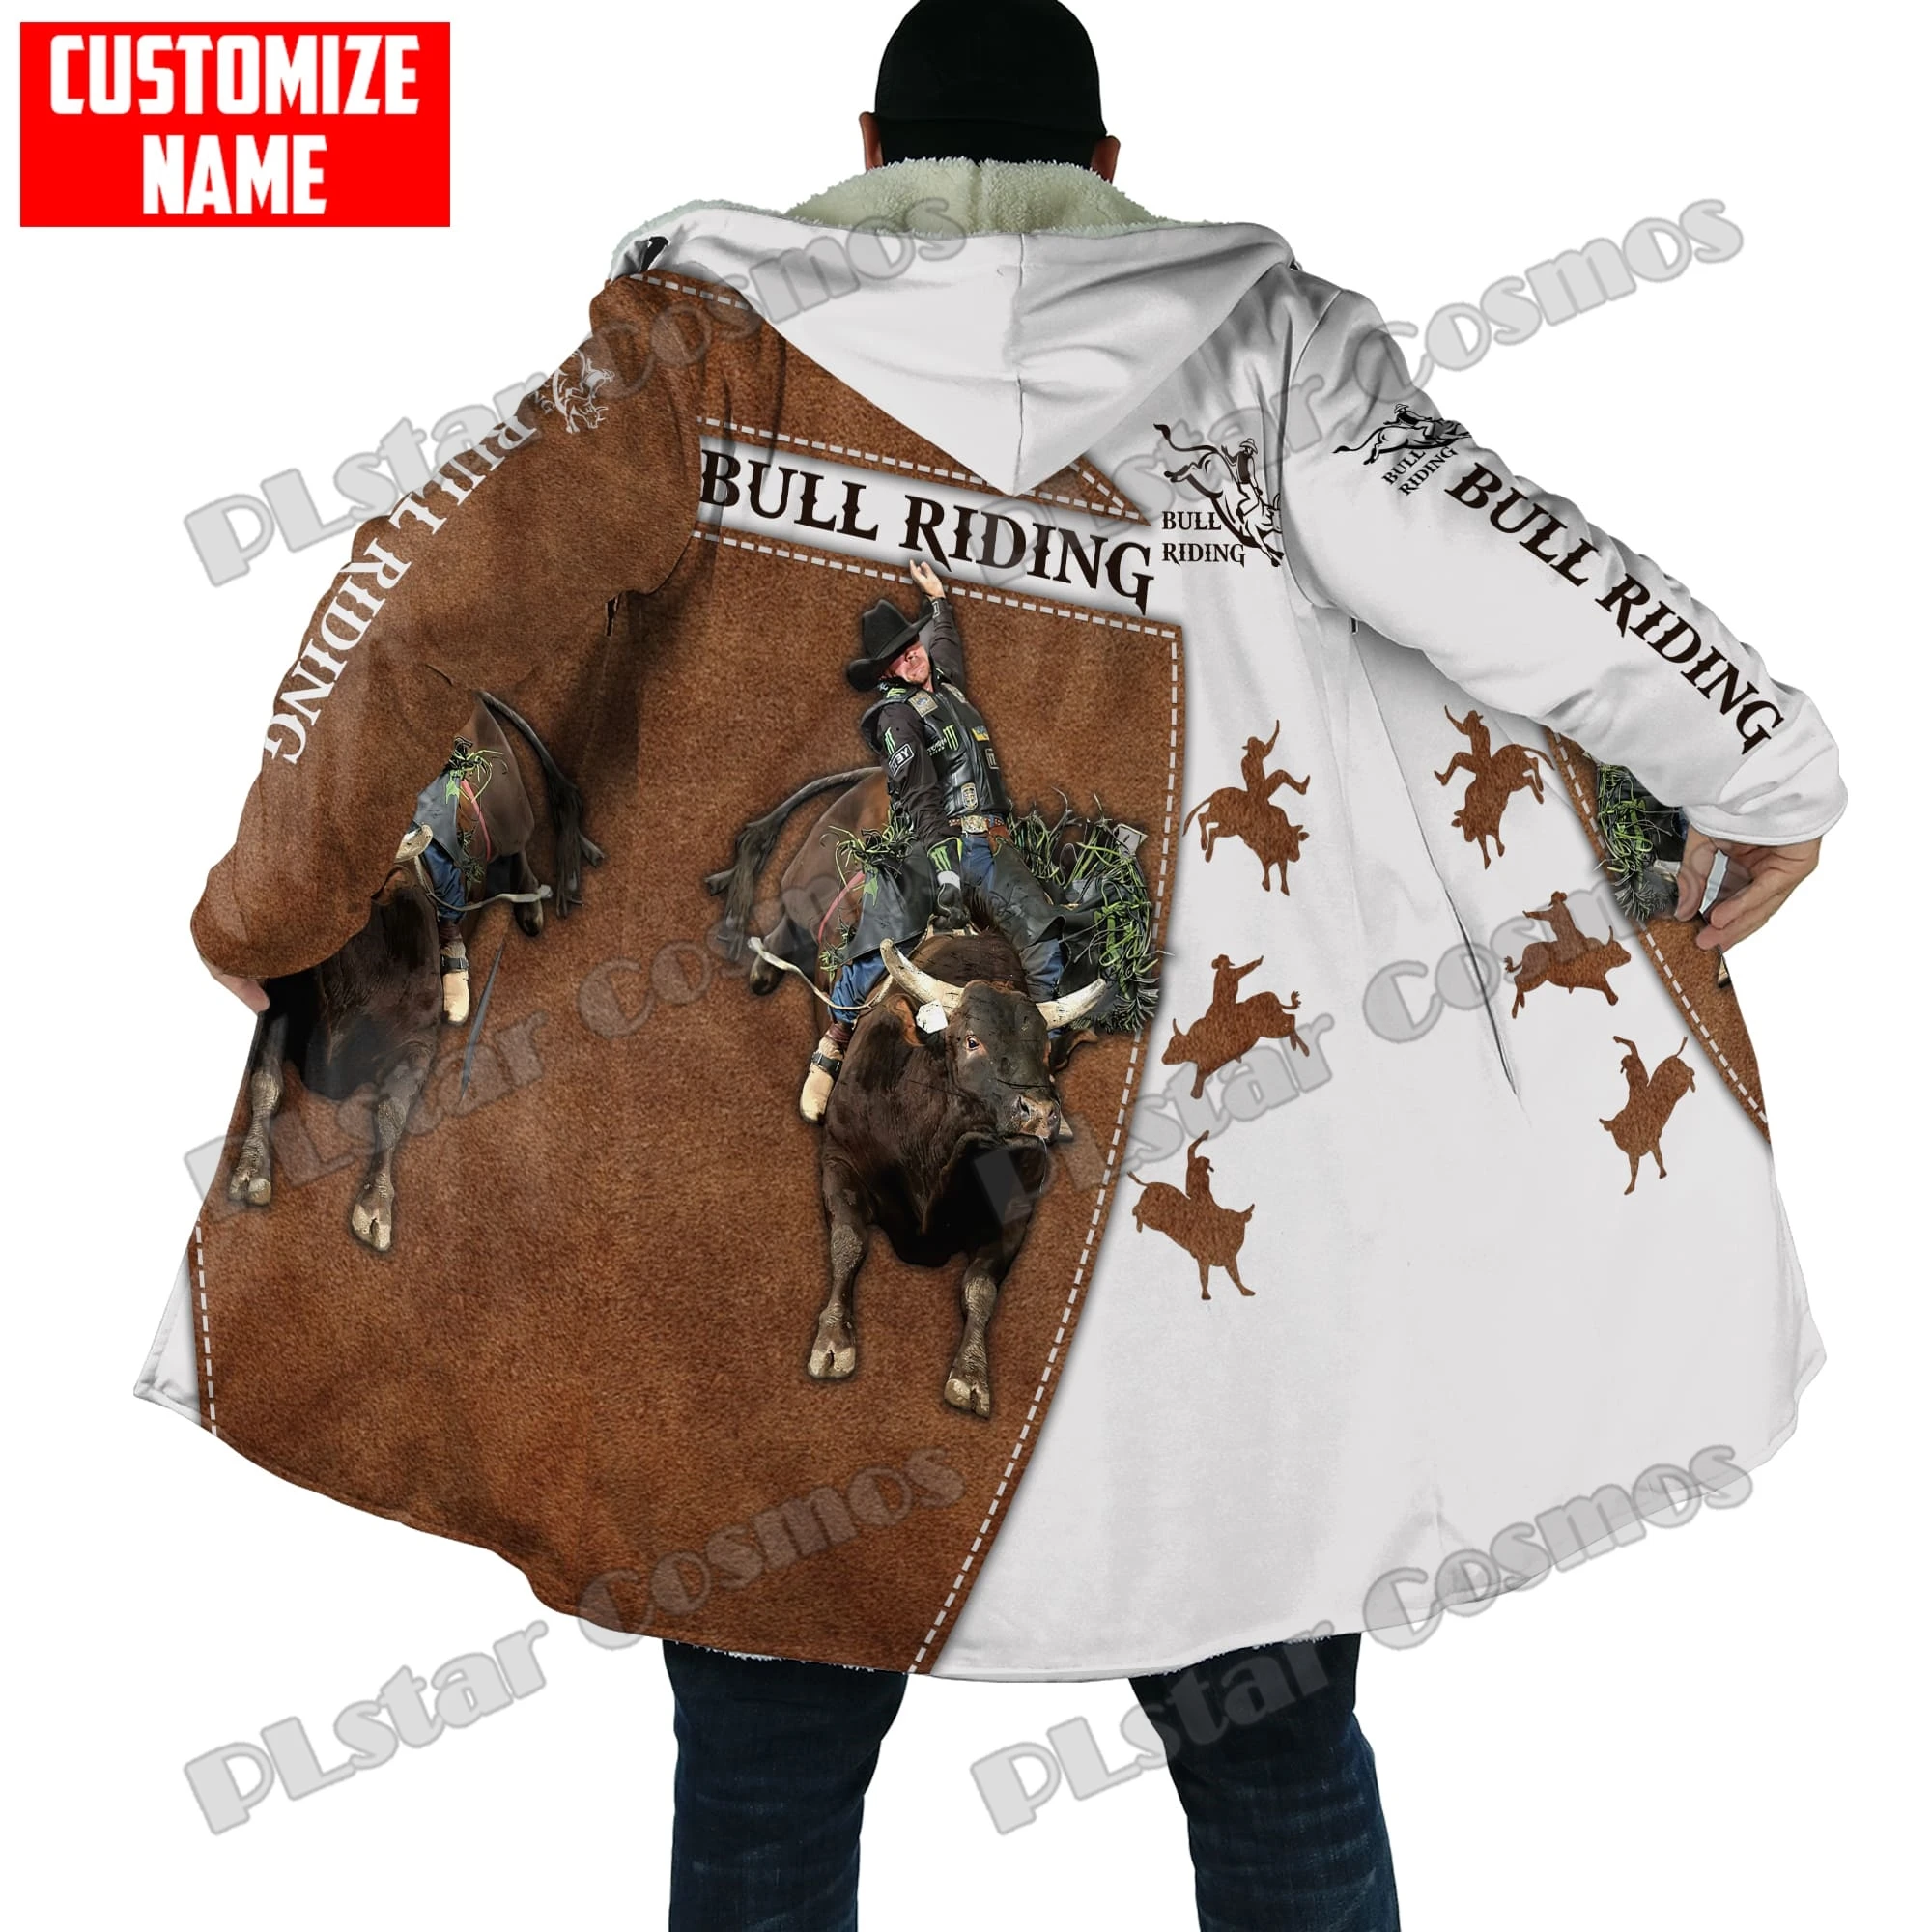 Winter Fashion Mens Cloak Personalized Name Bull Riding 3D Printed Fleece Hooded cloak Unisex Casual Thick Warm Cape coat PJ08 men woolich racing honda racing logo bandana neck gaiter printed motorcycle mask scarf warm headband for riding windproof